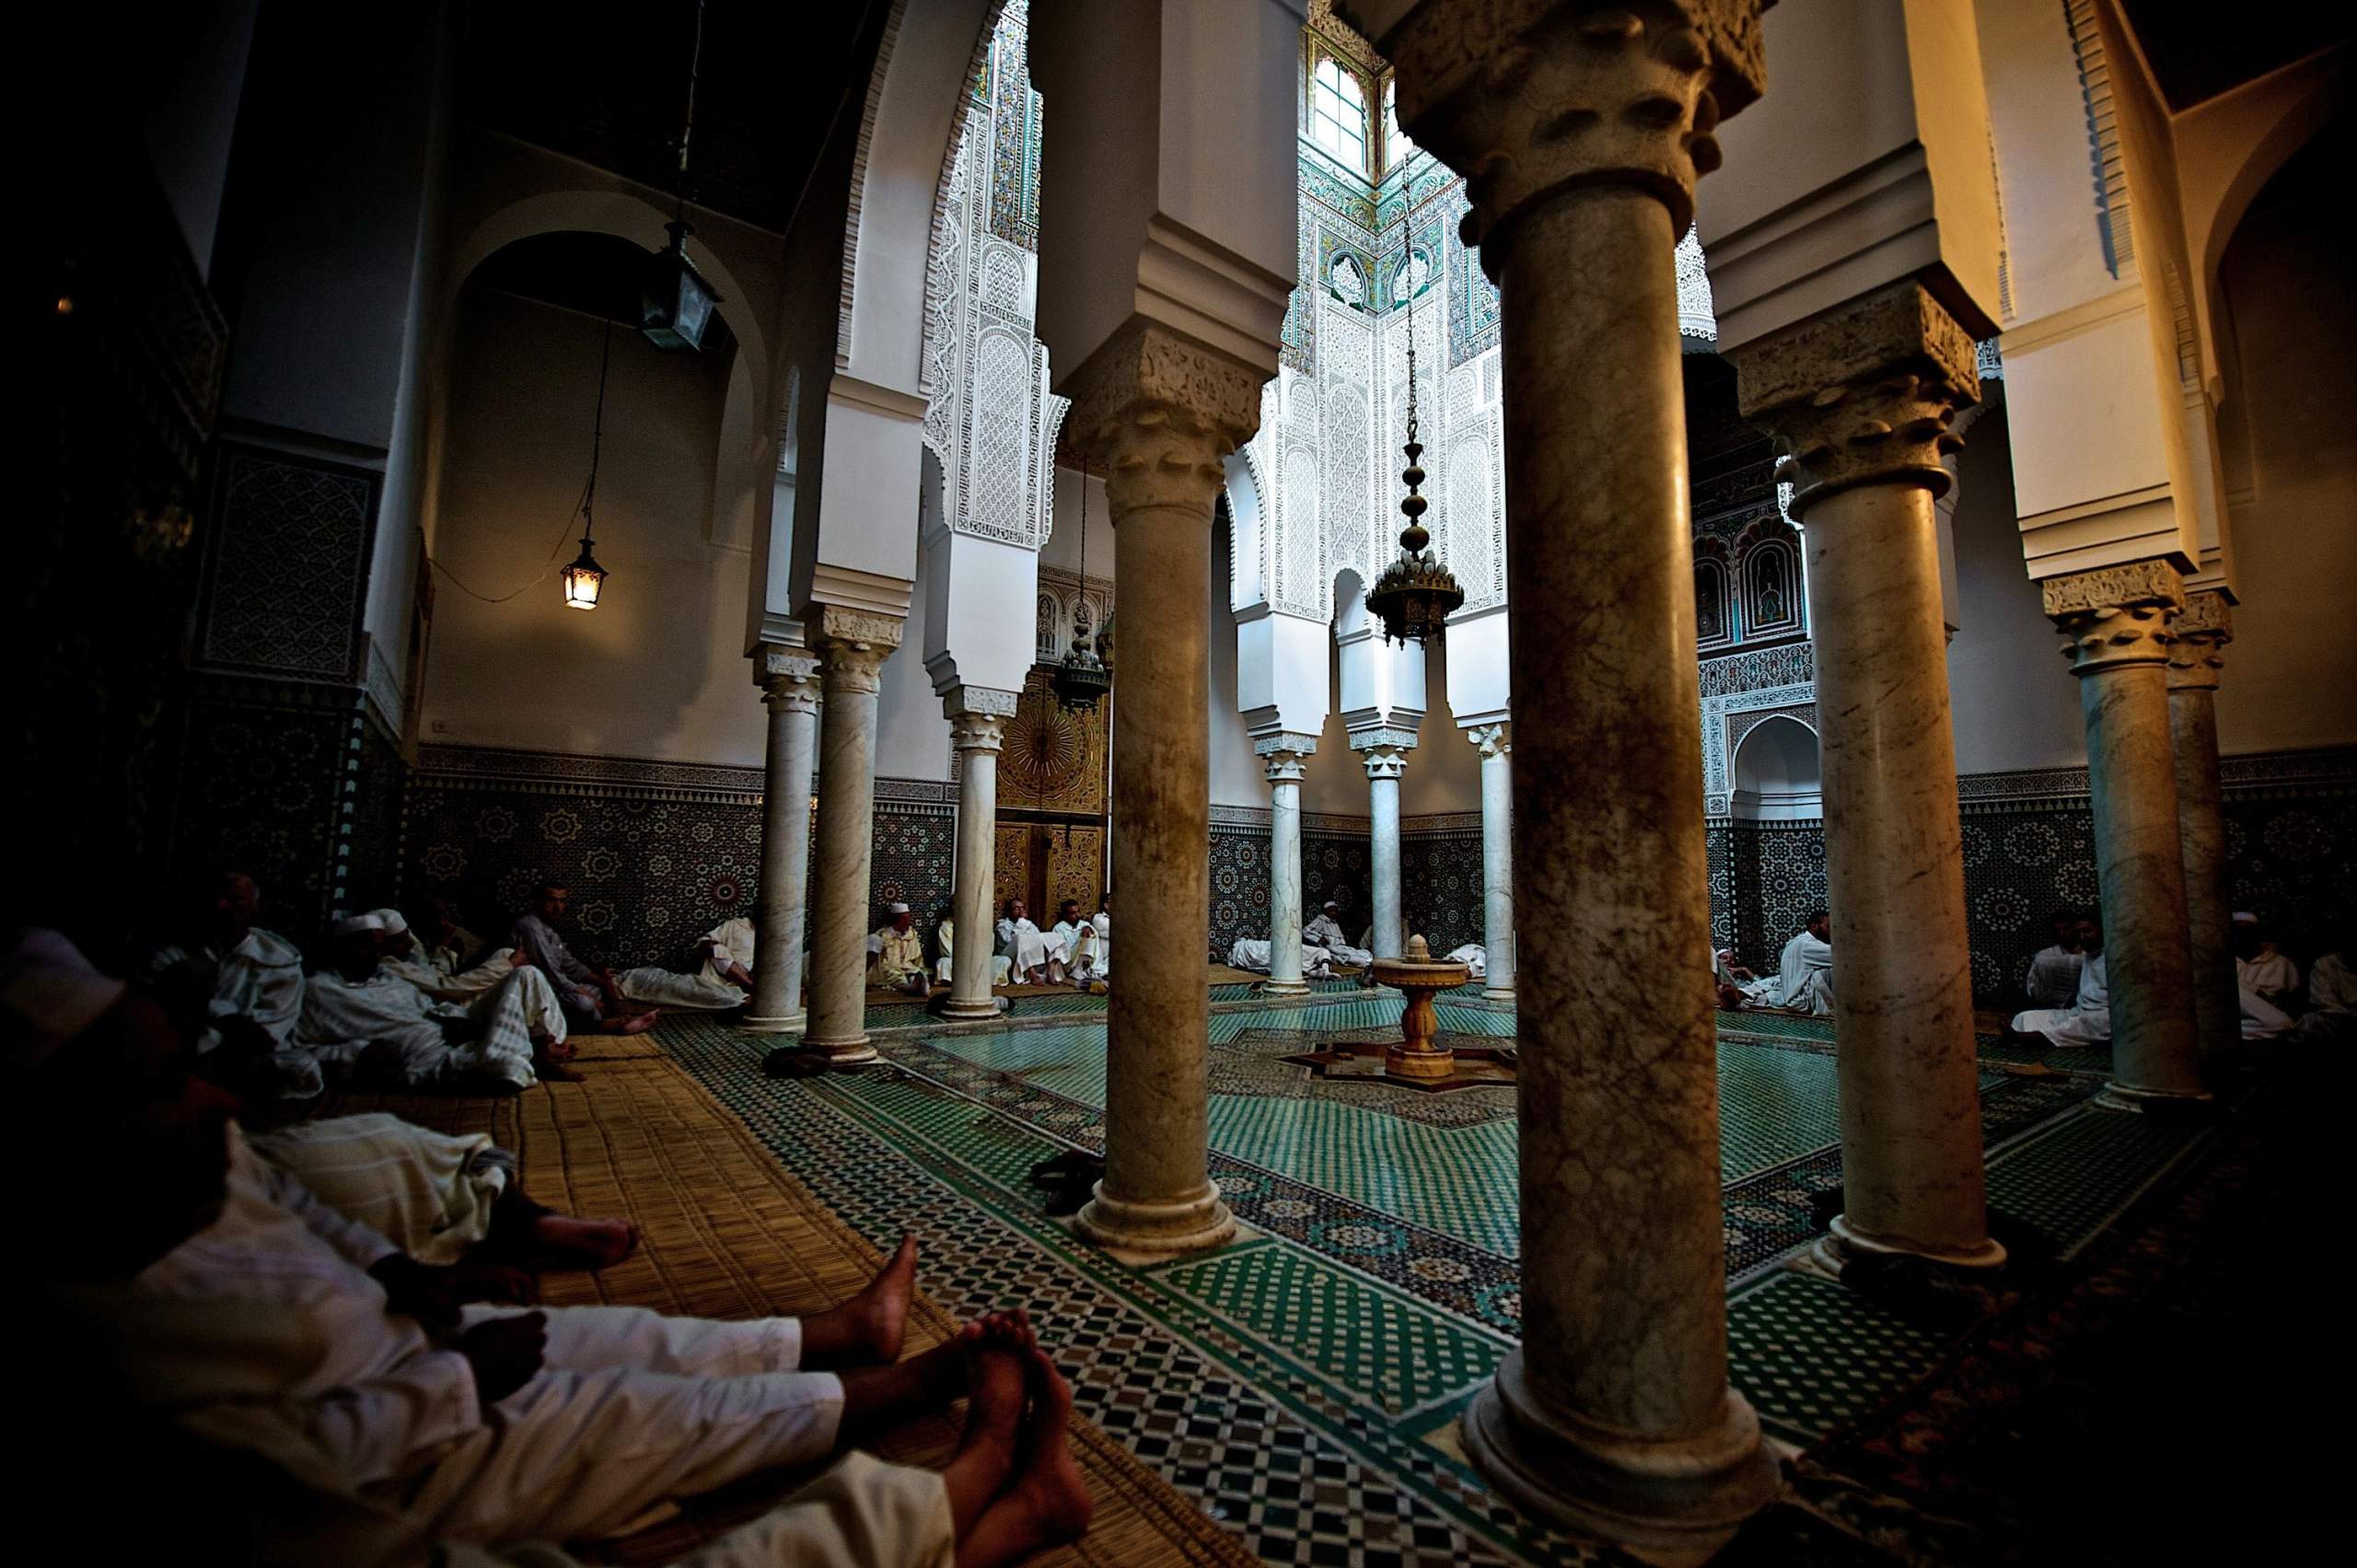 Mosque in Morocco